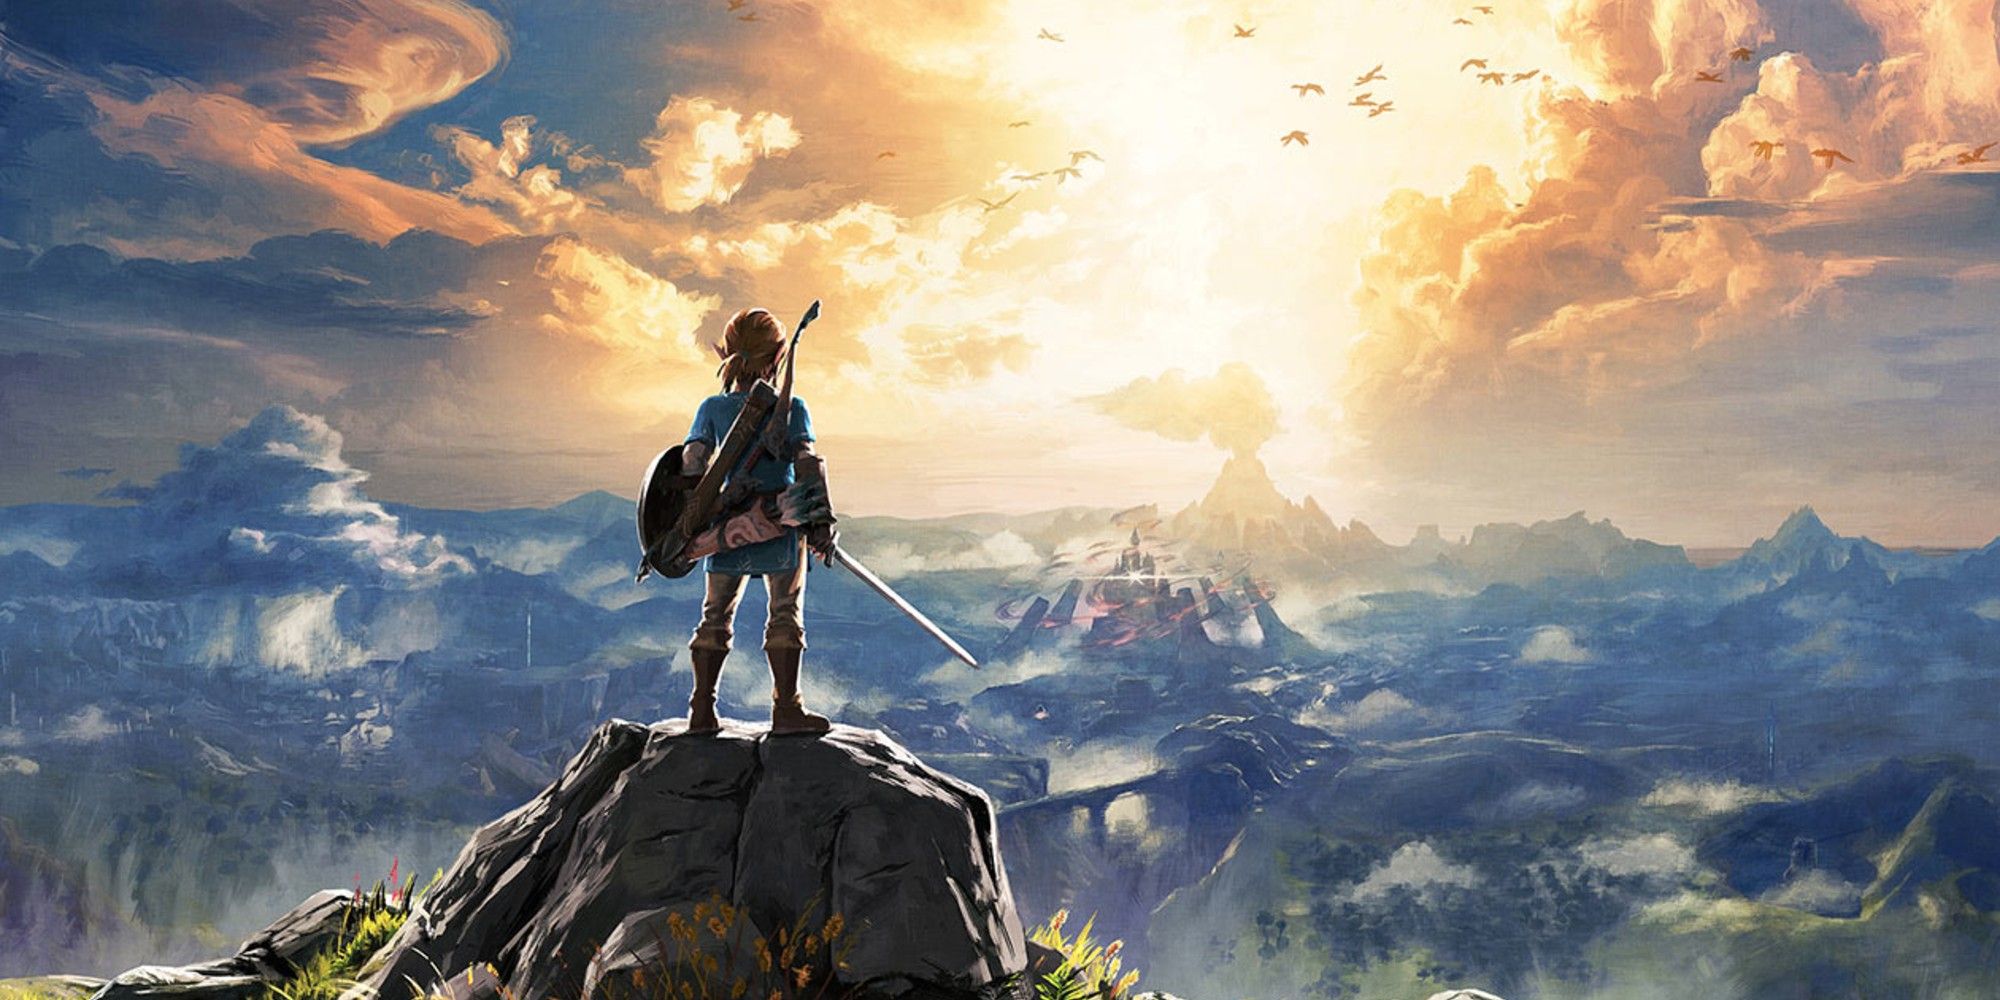 Link stands atop a cliff in The Legend of Zelda Breath of the Wild